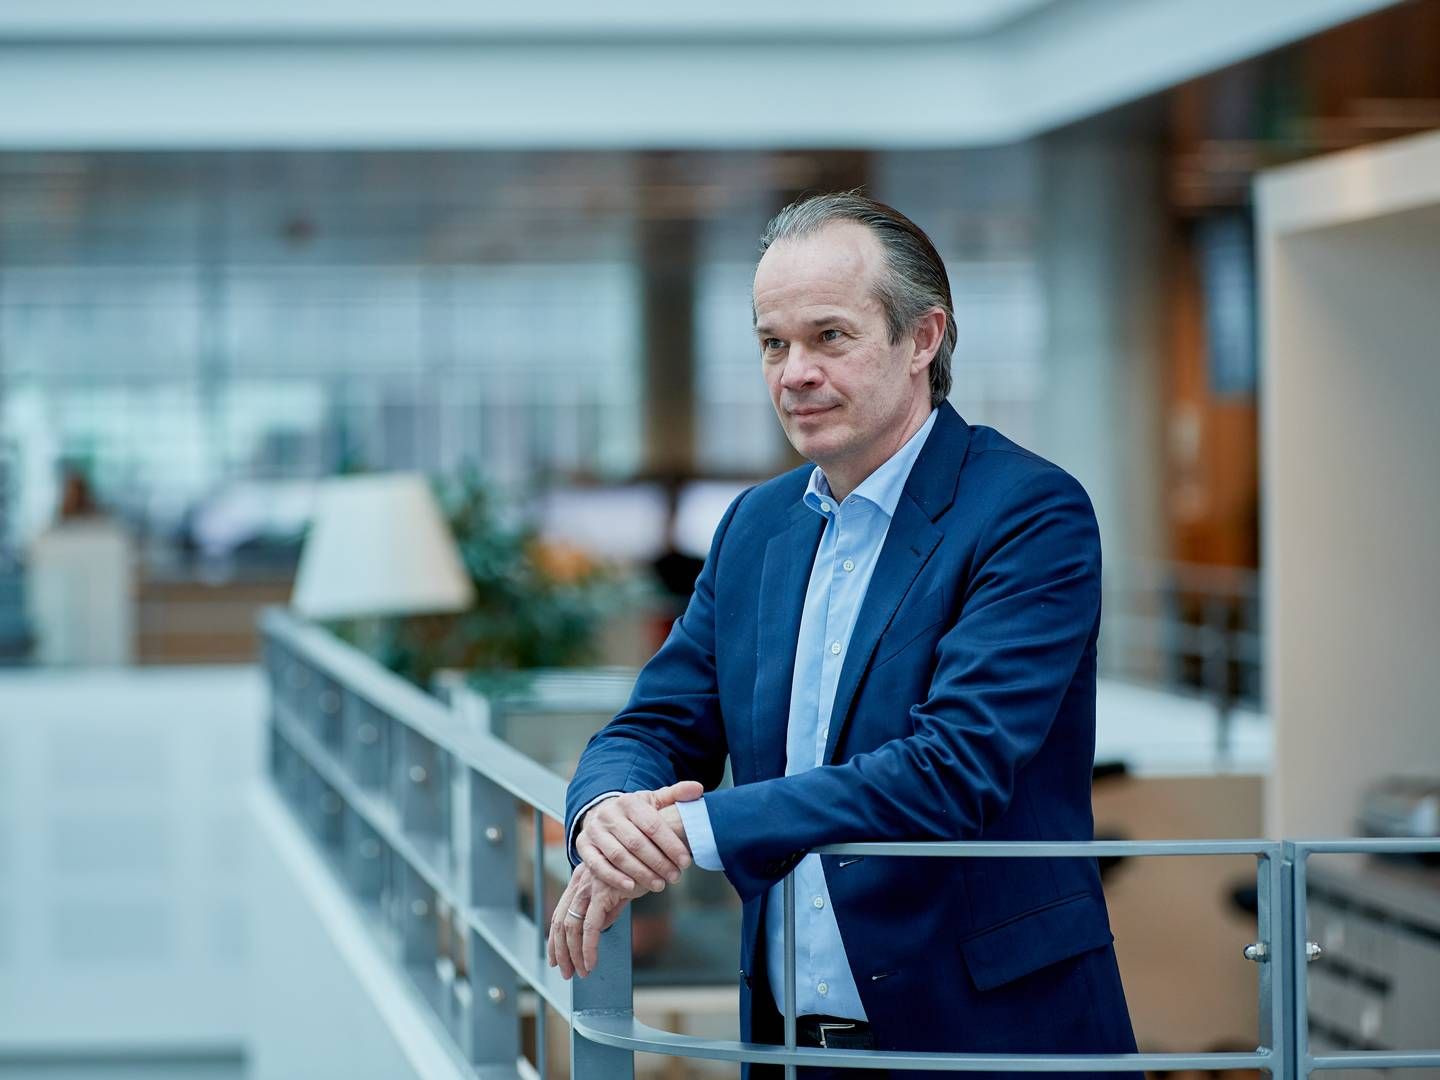 The good times in product tankers and for Torm have also been exploited by the company's CEO Jacob Meldgaard. He has sold Torm shares in the wake of a Torm quarterly report that showed the best nine months of earnings ever for the shipping company. | Photo: Torm